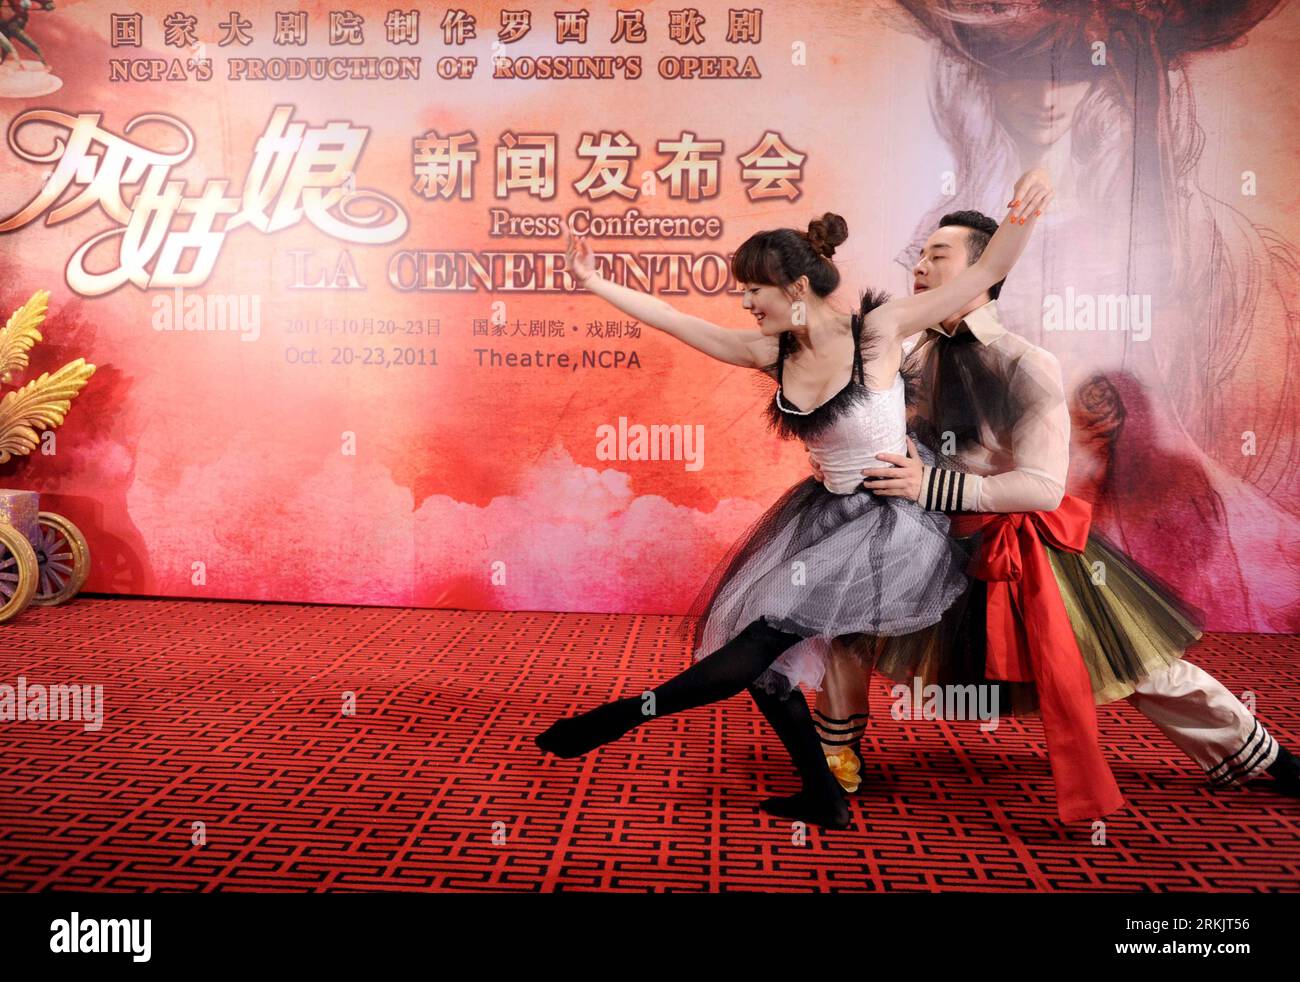 Bildnummer: 56161893  Datum: 09.10.2011  Copyright: imago/Xinhua (111009) -- BEIJING, Oct. 9, 2011 (Xinhua) -- Artists perform the first episode of the opera La Cenerentola on the press conference in Beijing, capital of China, Oct. 9, 2011. La Cenerentola, a three-act opera adapted by Gioachino Rossini, will be presented on the stage in Beijing from Oct. 20 to Oct. 23. The National Centre for the Performing Arts(NCPA) invited the international crew to create this well-known comic opera. (Xinhua/Luo Xiaoguang) (jy) CHINA-BEIJING-OPERA PUBLICATIONxNOTxINxCHN People Musik Kultur Oper PK x0x xtm 2 Stock Photo